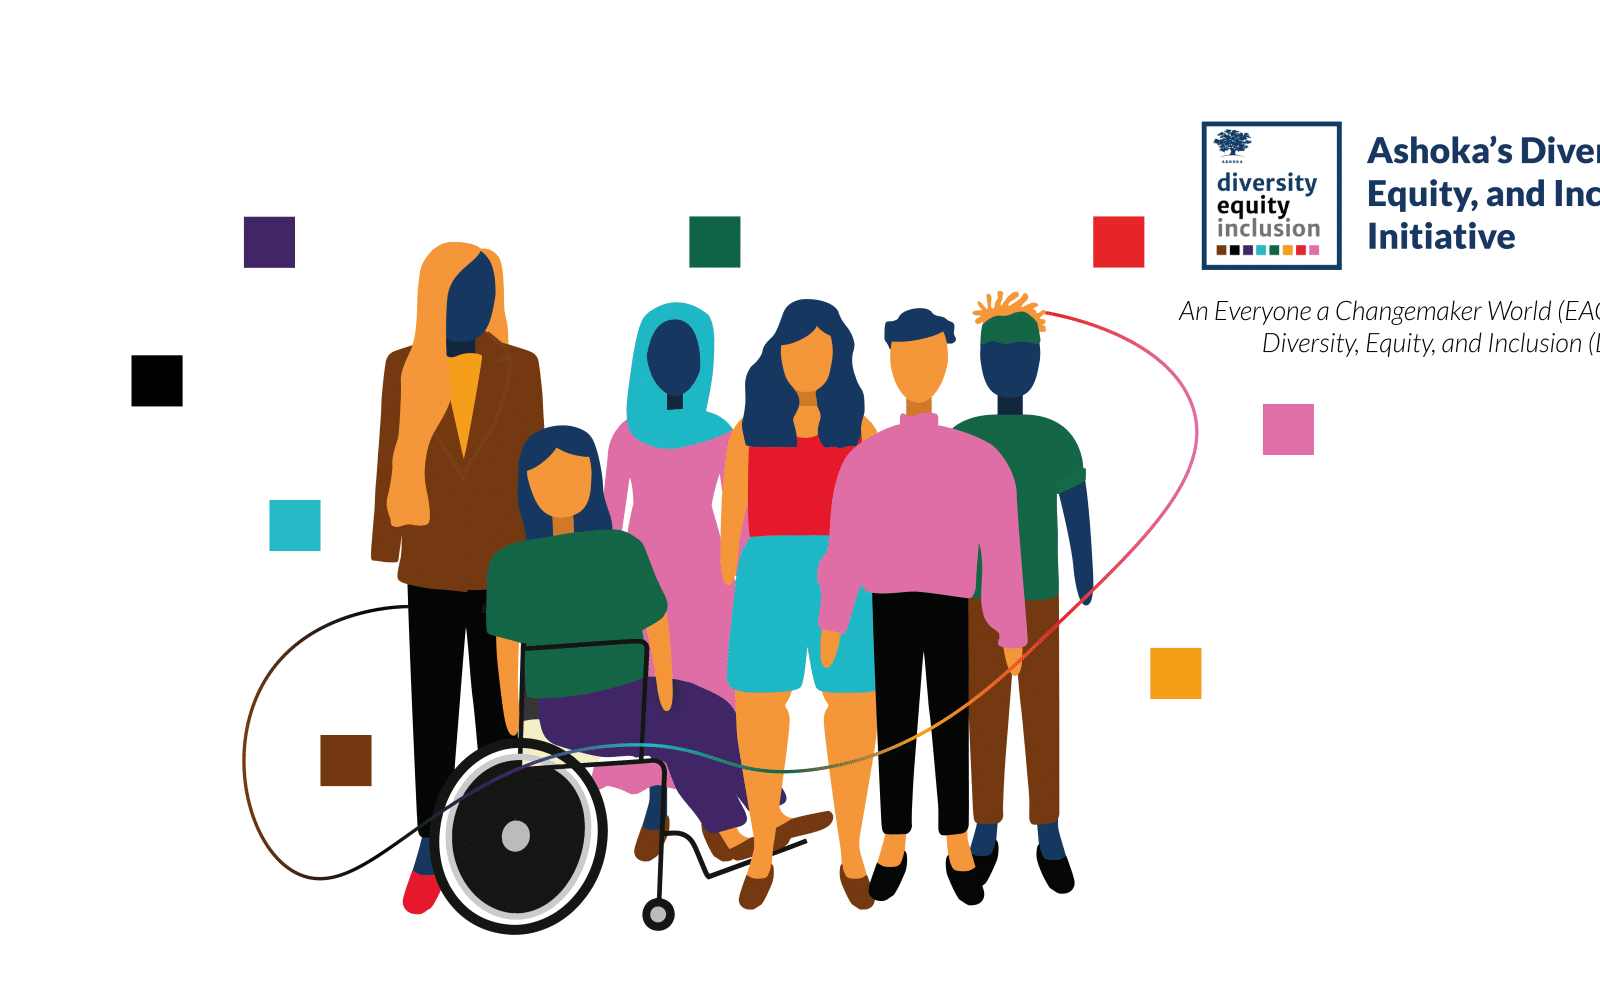 A diverse group of people, colorful squares and a colorful line in a irregular shape around them. On the right there are the logo of Ashoka's DEI Initiative, it's written "Ashoka's Diversity, Equity, and Inclusion Initiative". Right below is written "An Everyone a Changemaker World (EACH) through Diversity, Equity, and Inclusion".